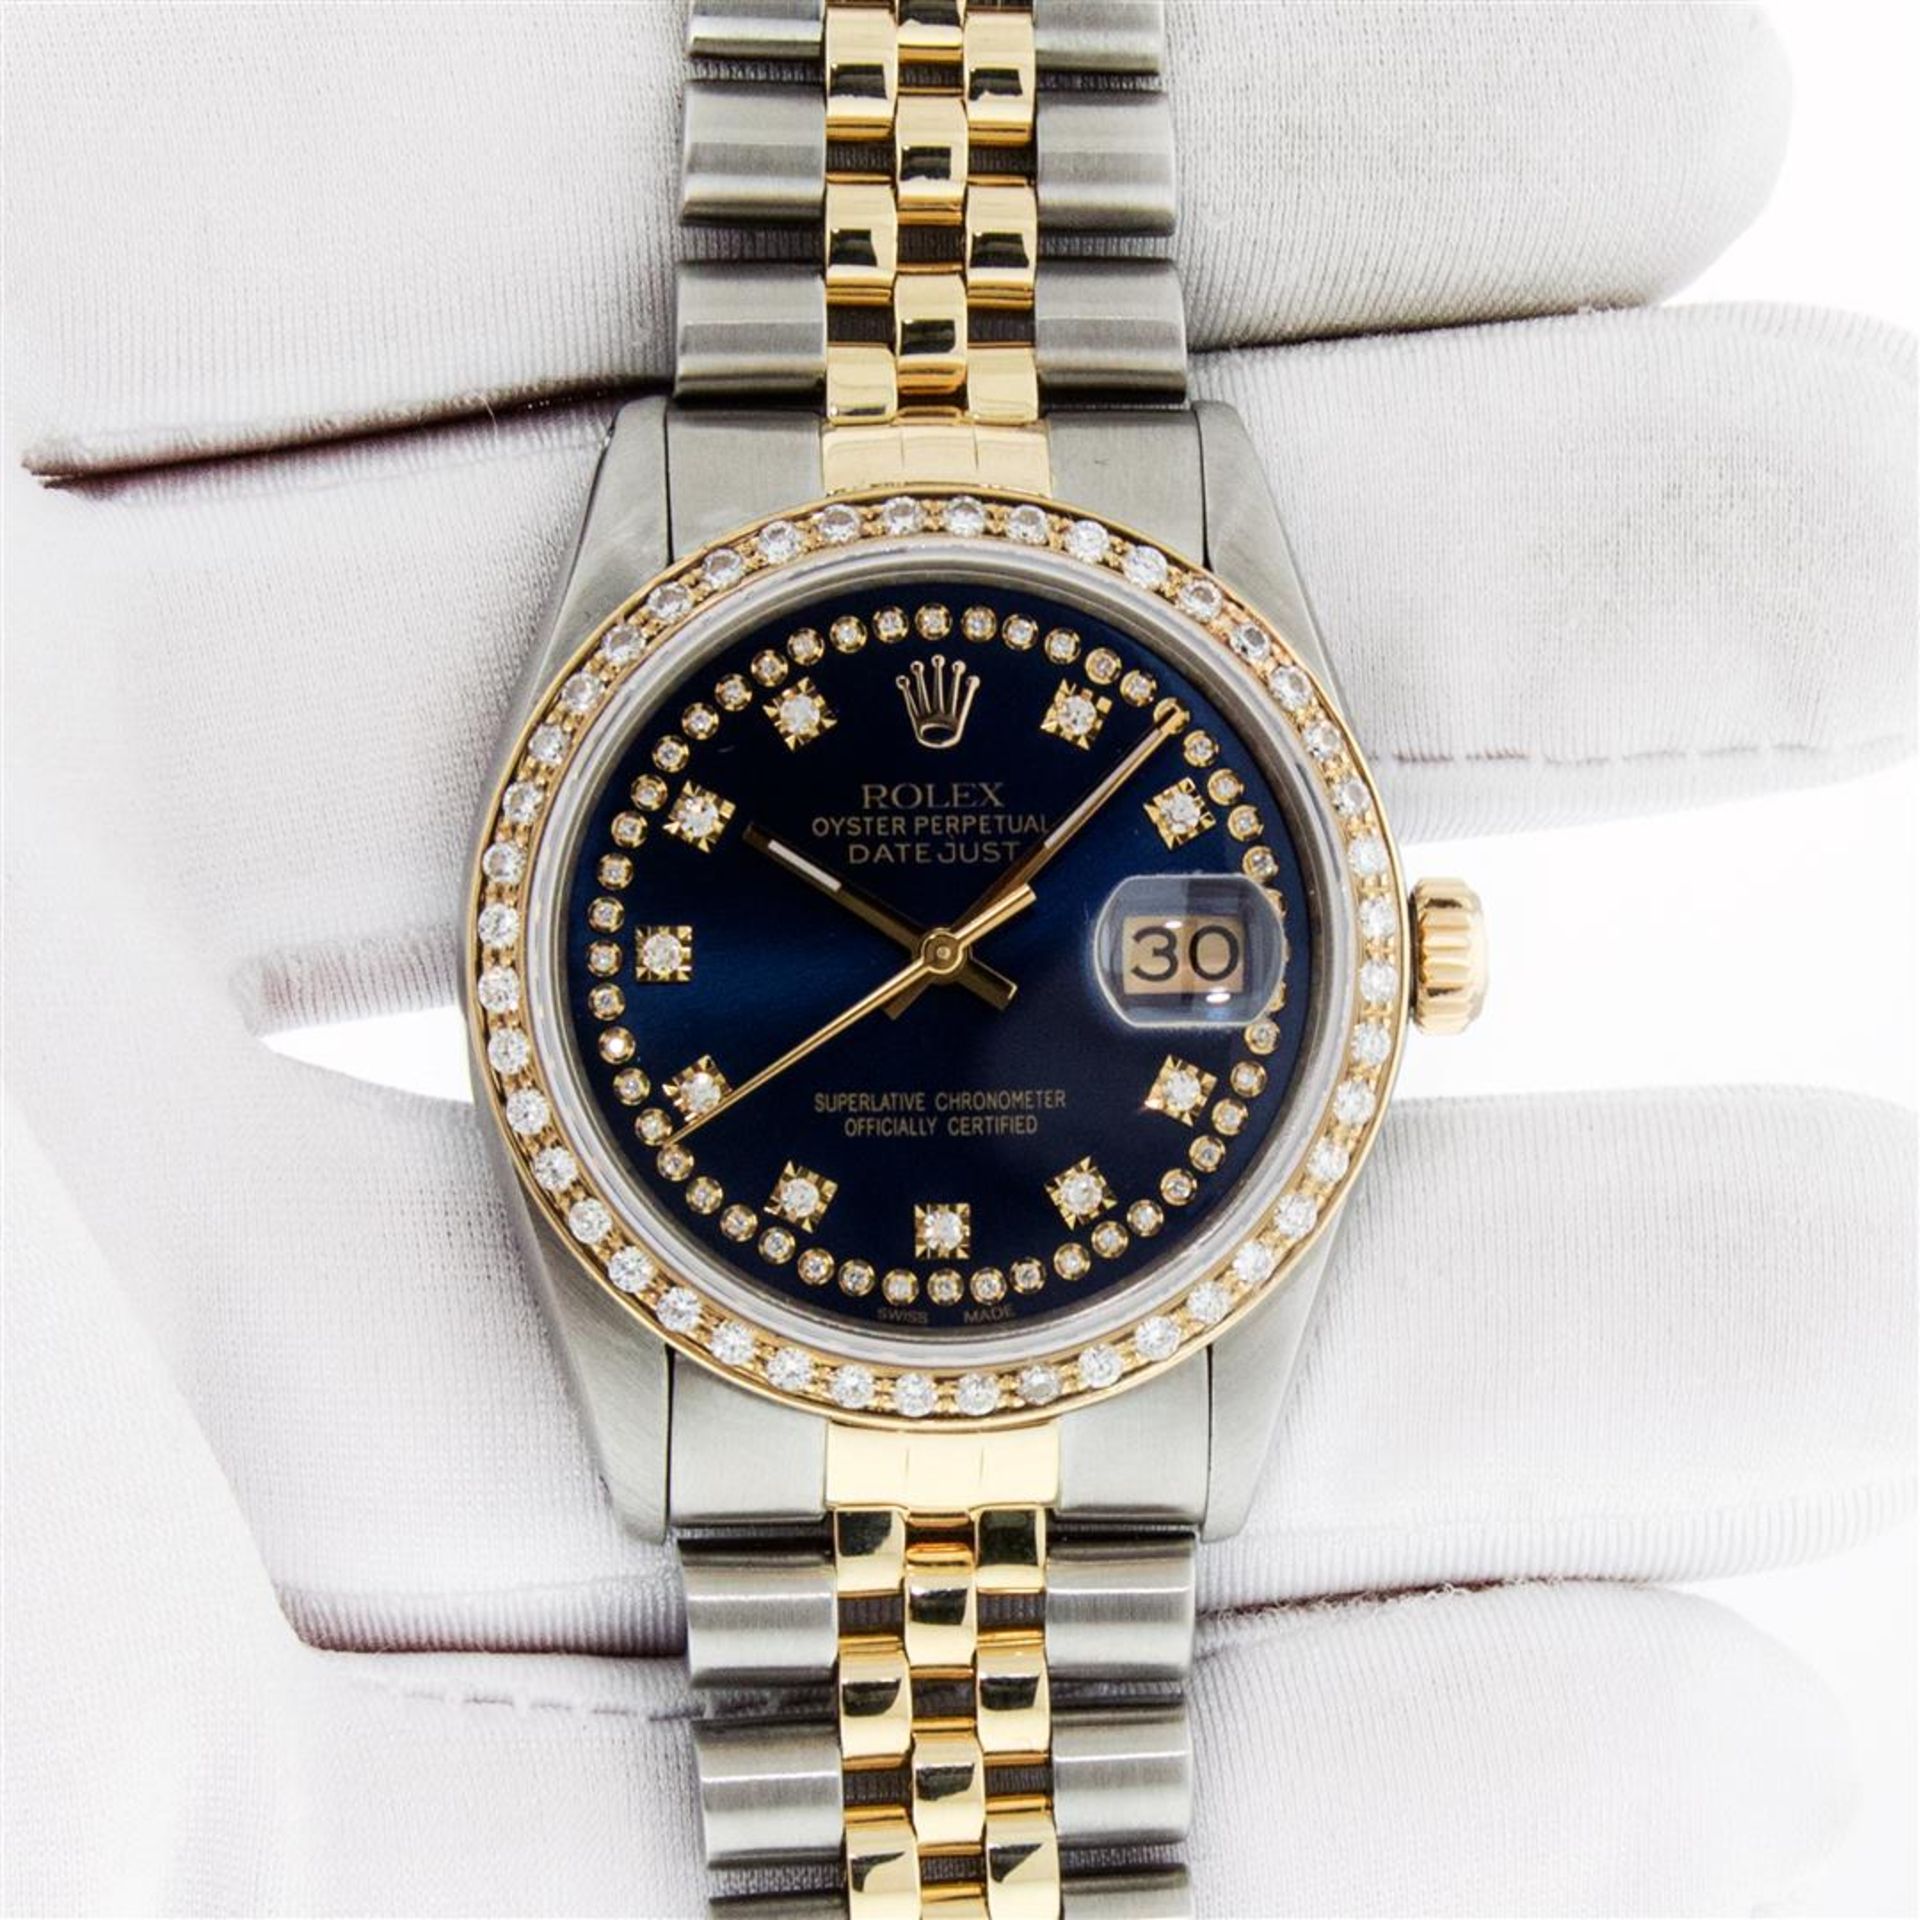 Rolex Mens 2 Tone Blue String VS Diamond Datejust Wristwatch Oyster Perpetual Wi - Image 3 of 9